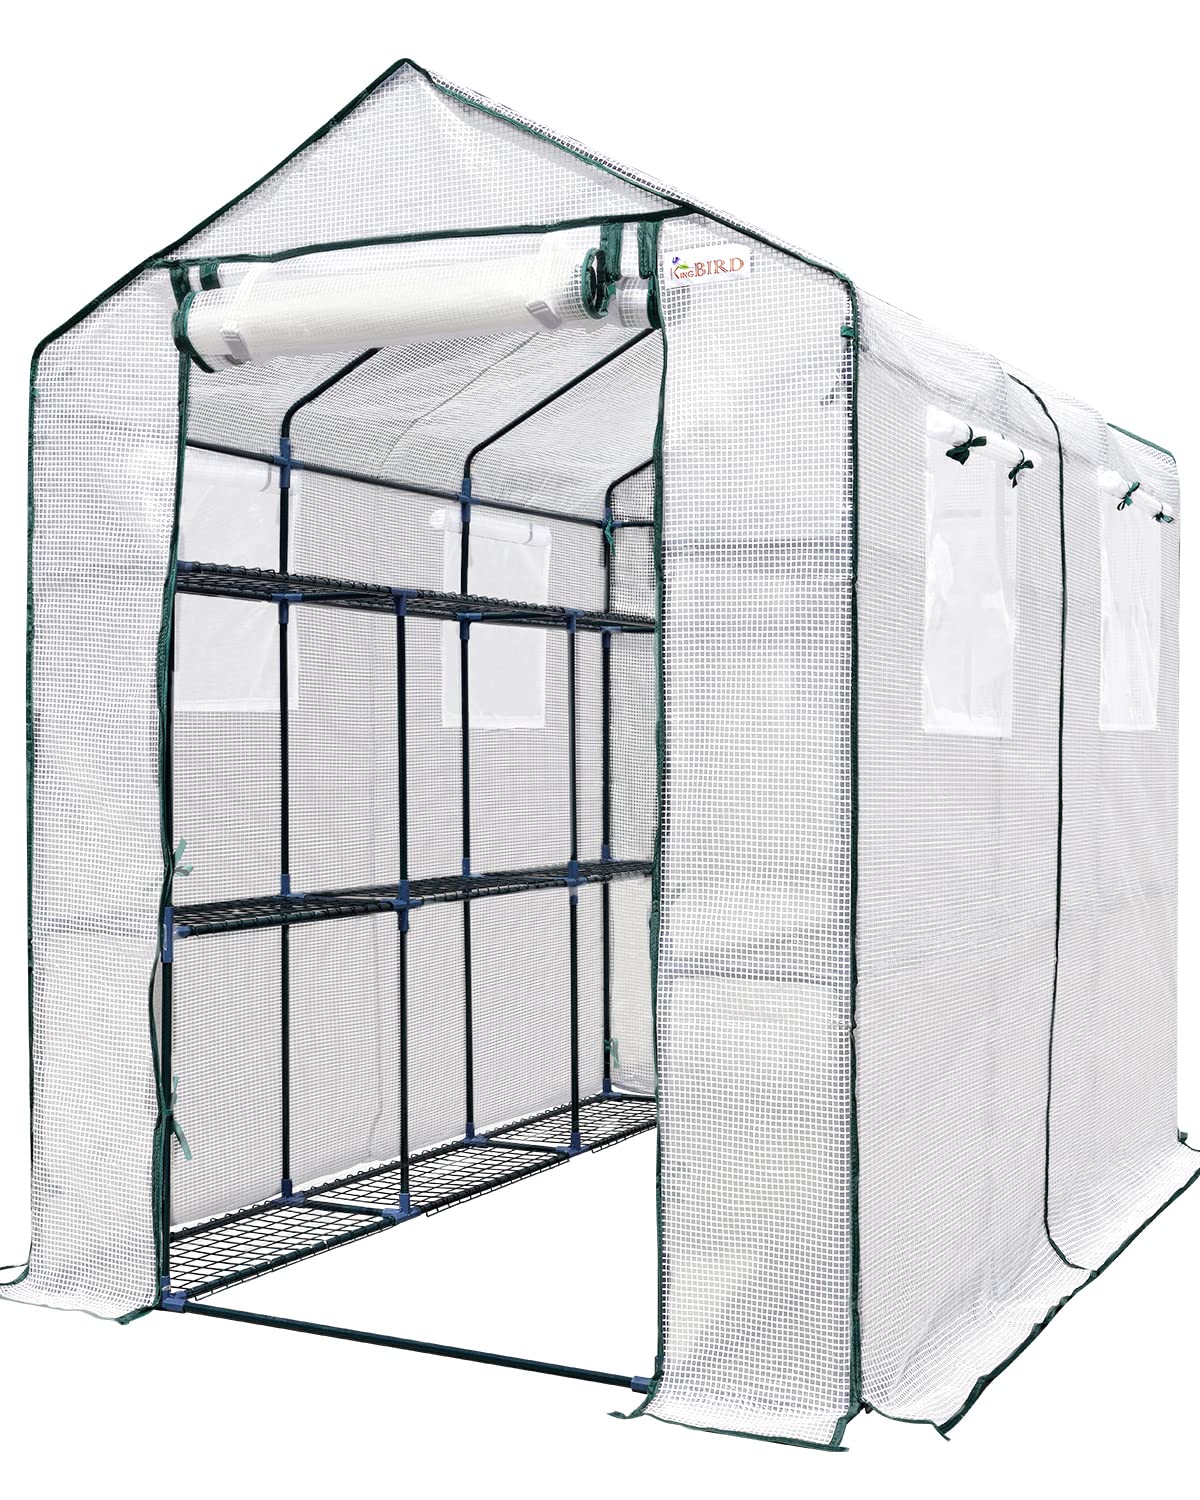 King Bird Upgraded 7 X 47 X 64 Ft Walk-In Greenhouse For Outdoors, Thickened Pe Cover  Heavy Duty Powder-Coated Steel, W Zipper